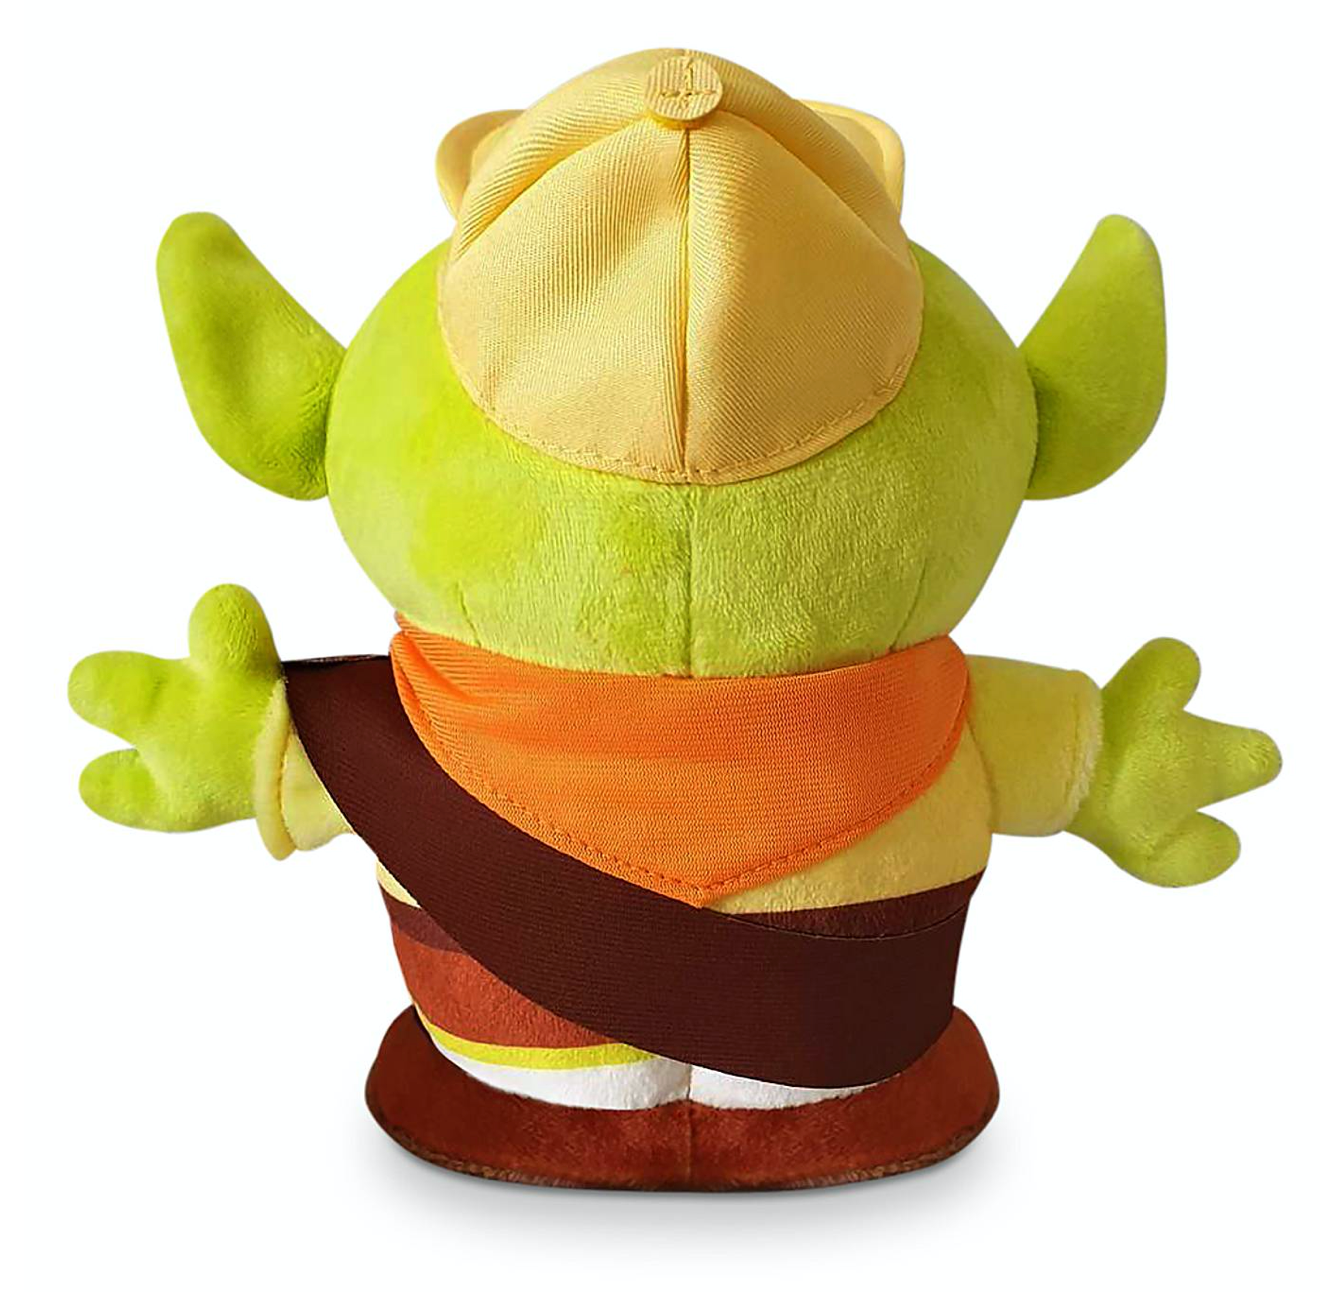 Disney Toy Story Alien Pixar Remix Plush Russell Limited New with Tag